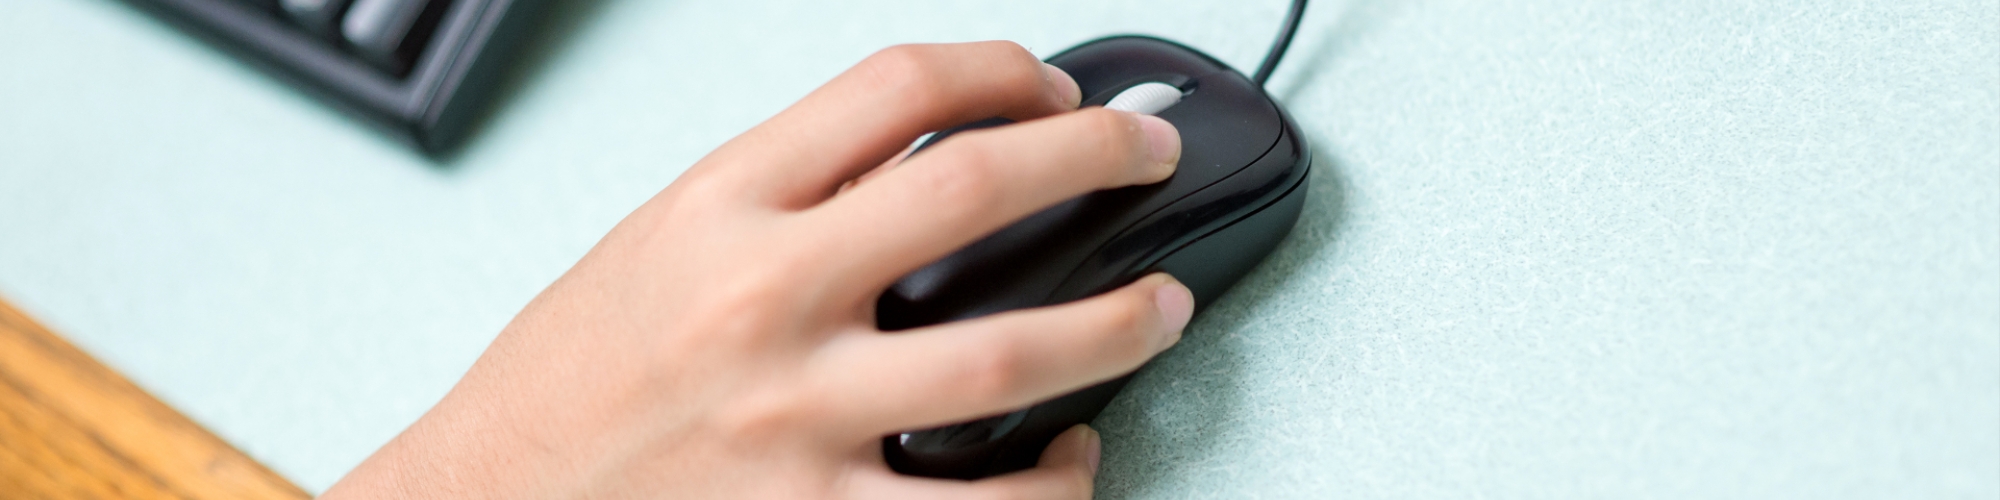 A young student's hand on an external mouse